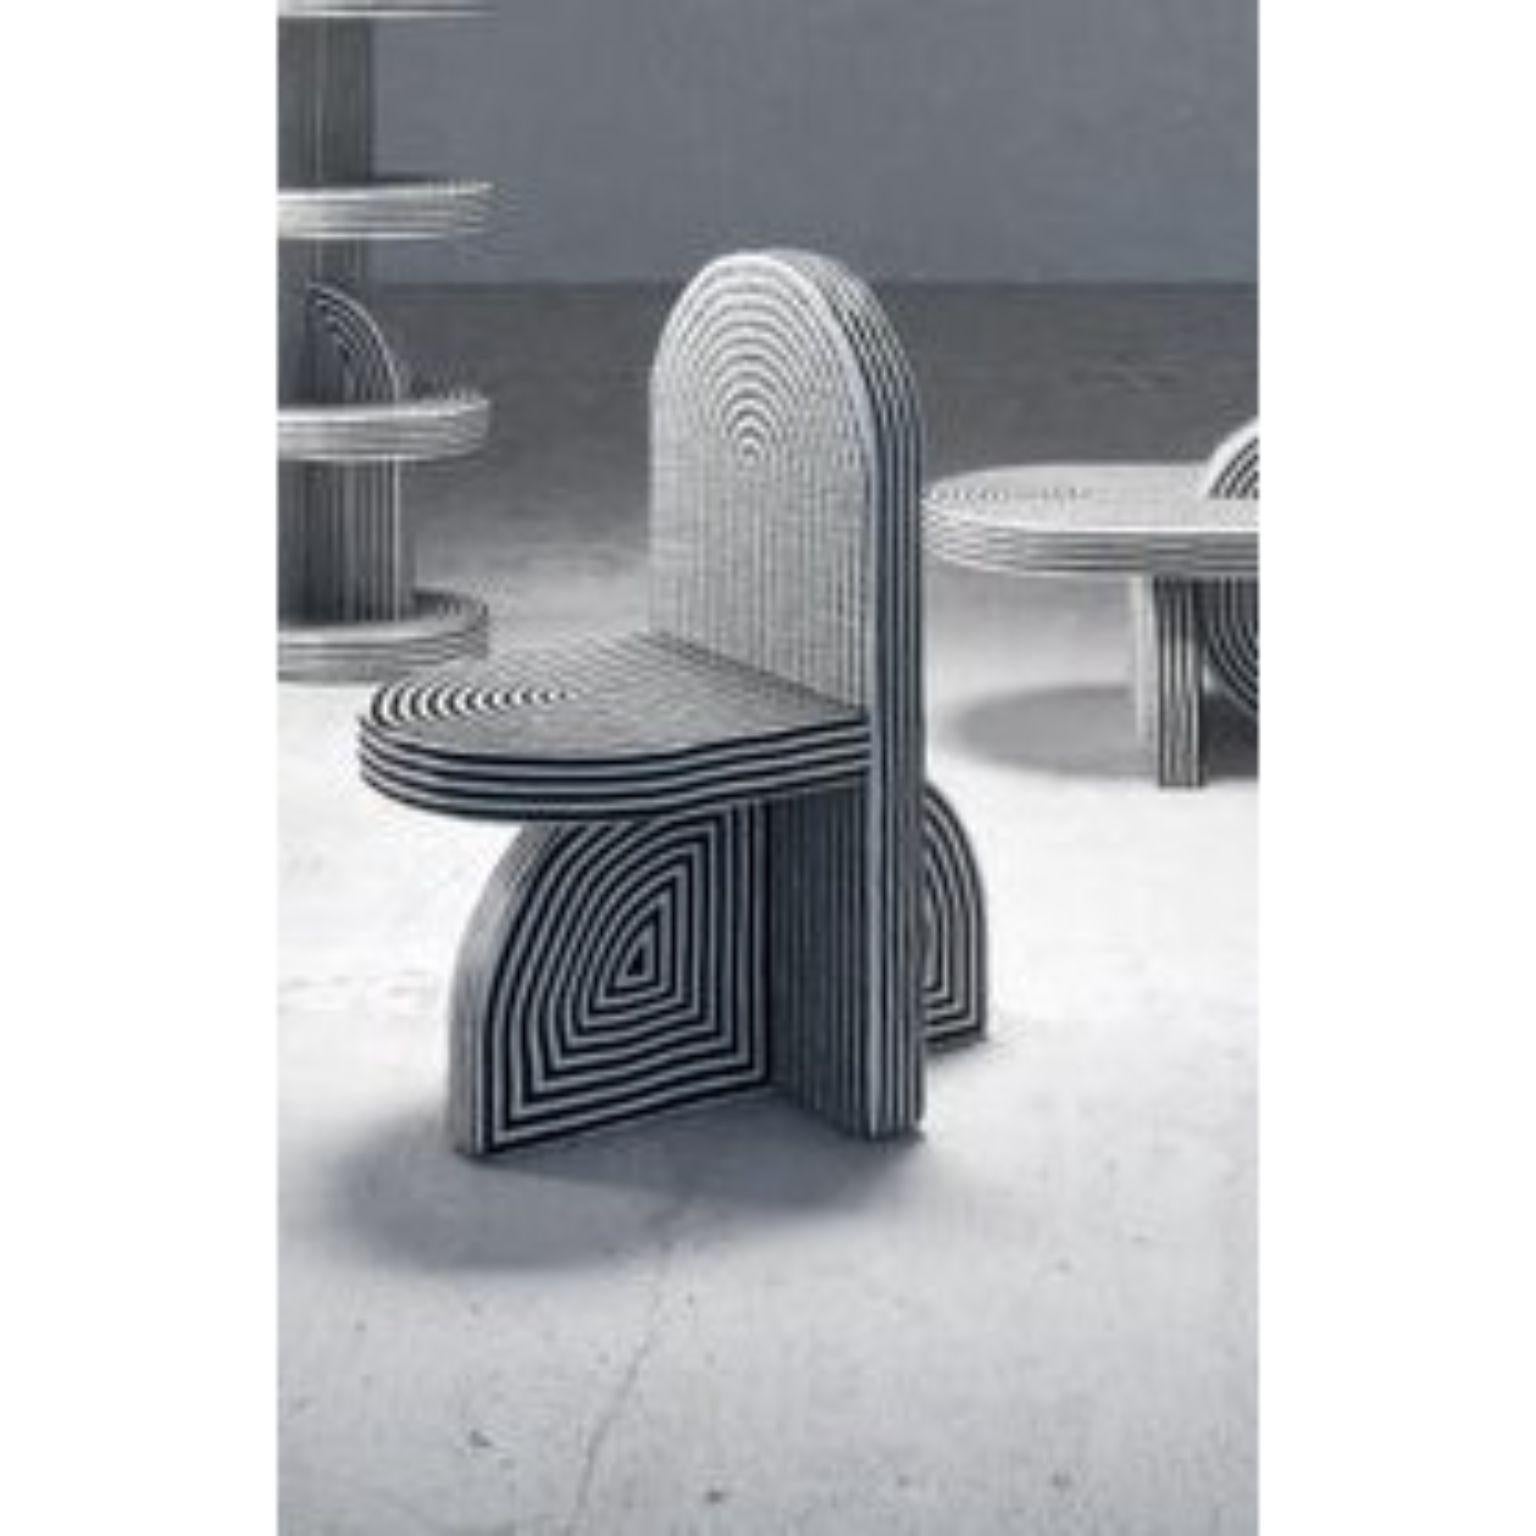 After ago chair by Richard Yasmine.
Materials: Foam, Lightweight concrete, plaster and acrylic.
Dimensions: H 90 x W 45 x D 52cm/65cm.
Seat height 45 cm.
Seat depth 45cm.
Seat width 45 cm.
Total depth on floor 75 cm.

After Ago is an ode to